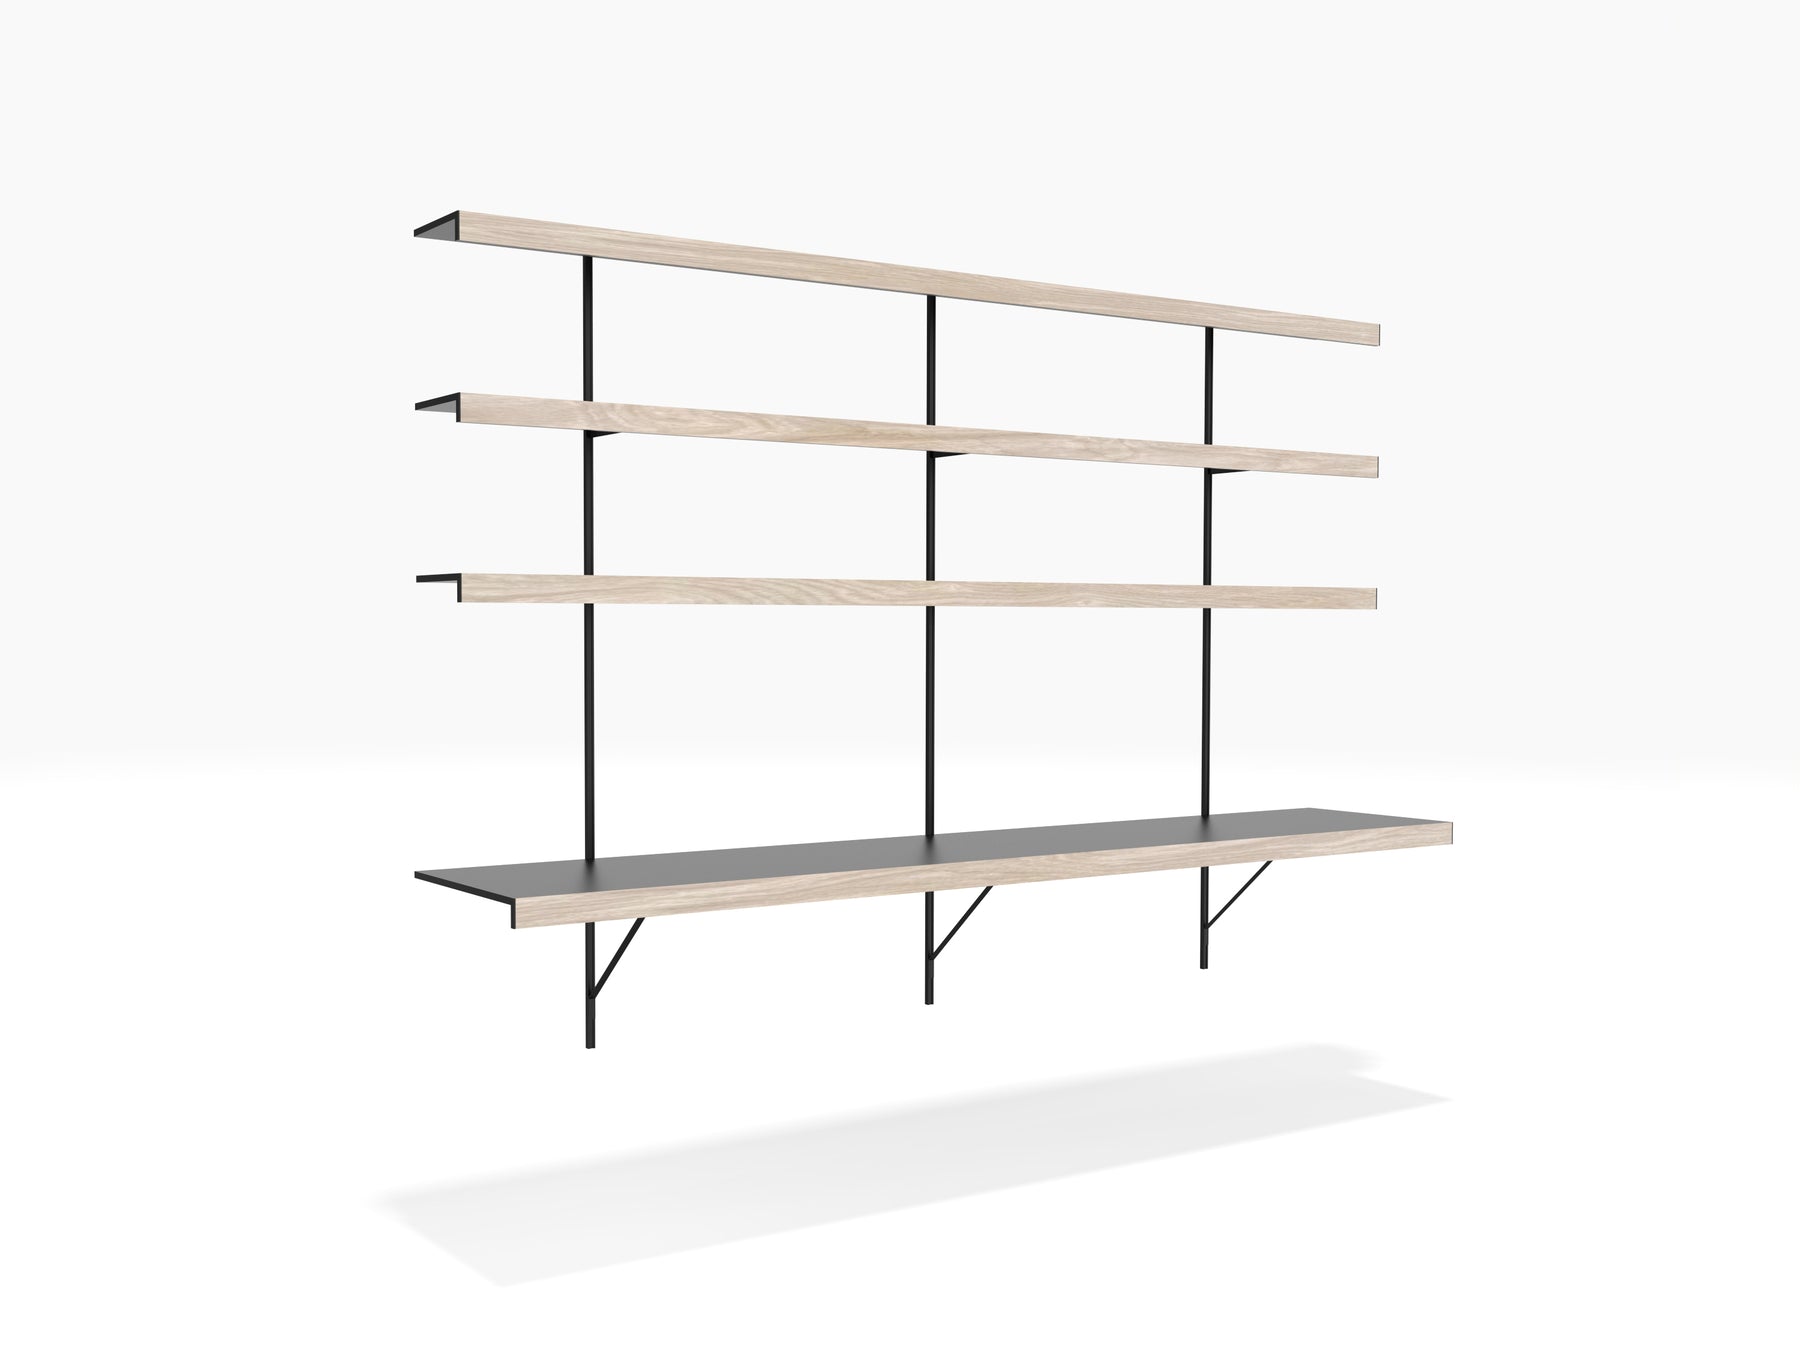 Wall mounted desk with shelves in black and oak finishes